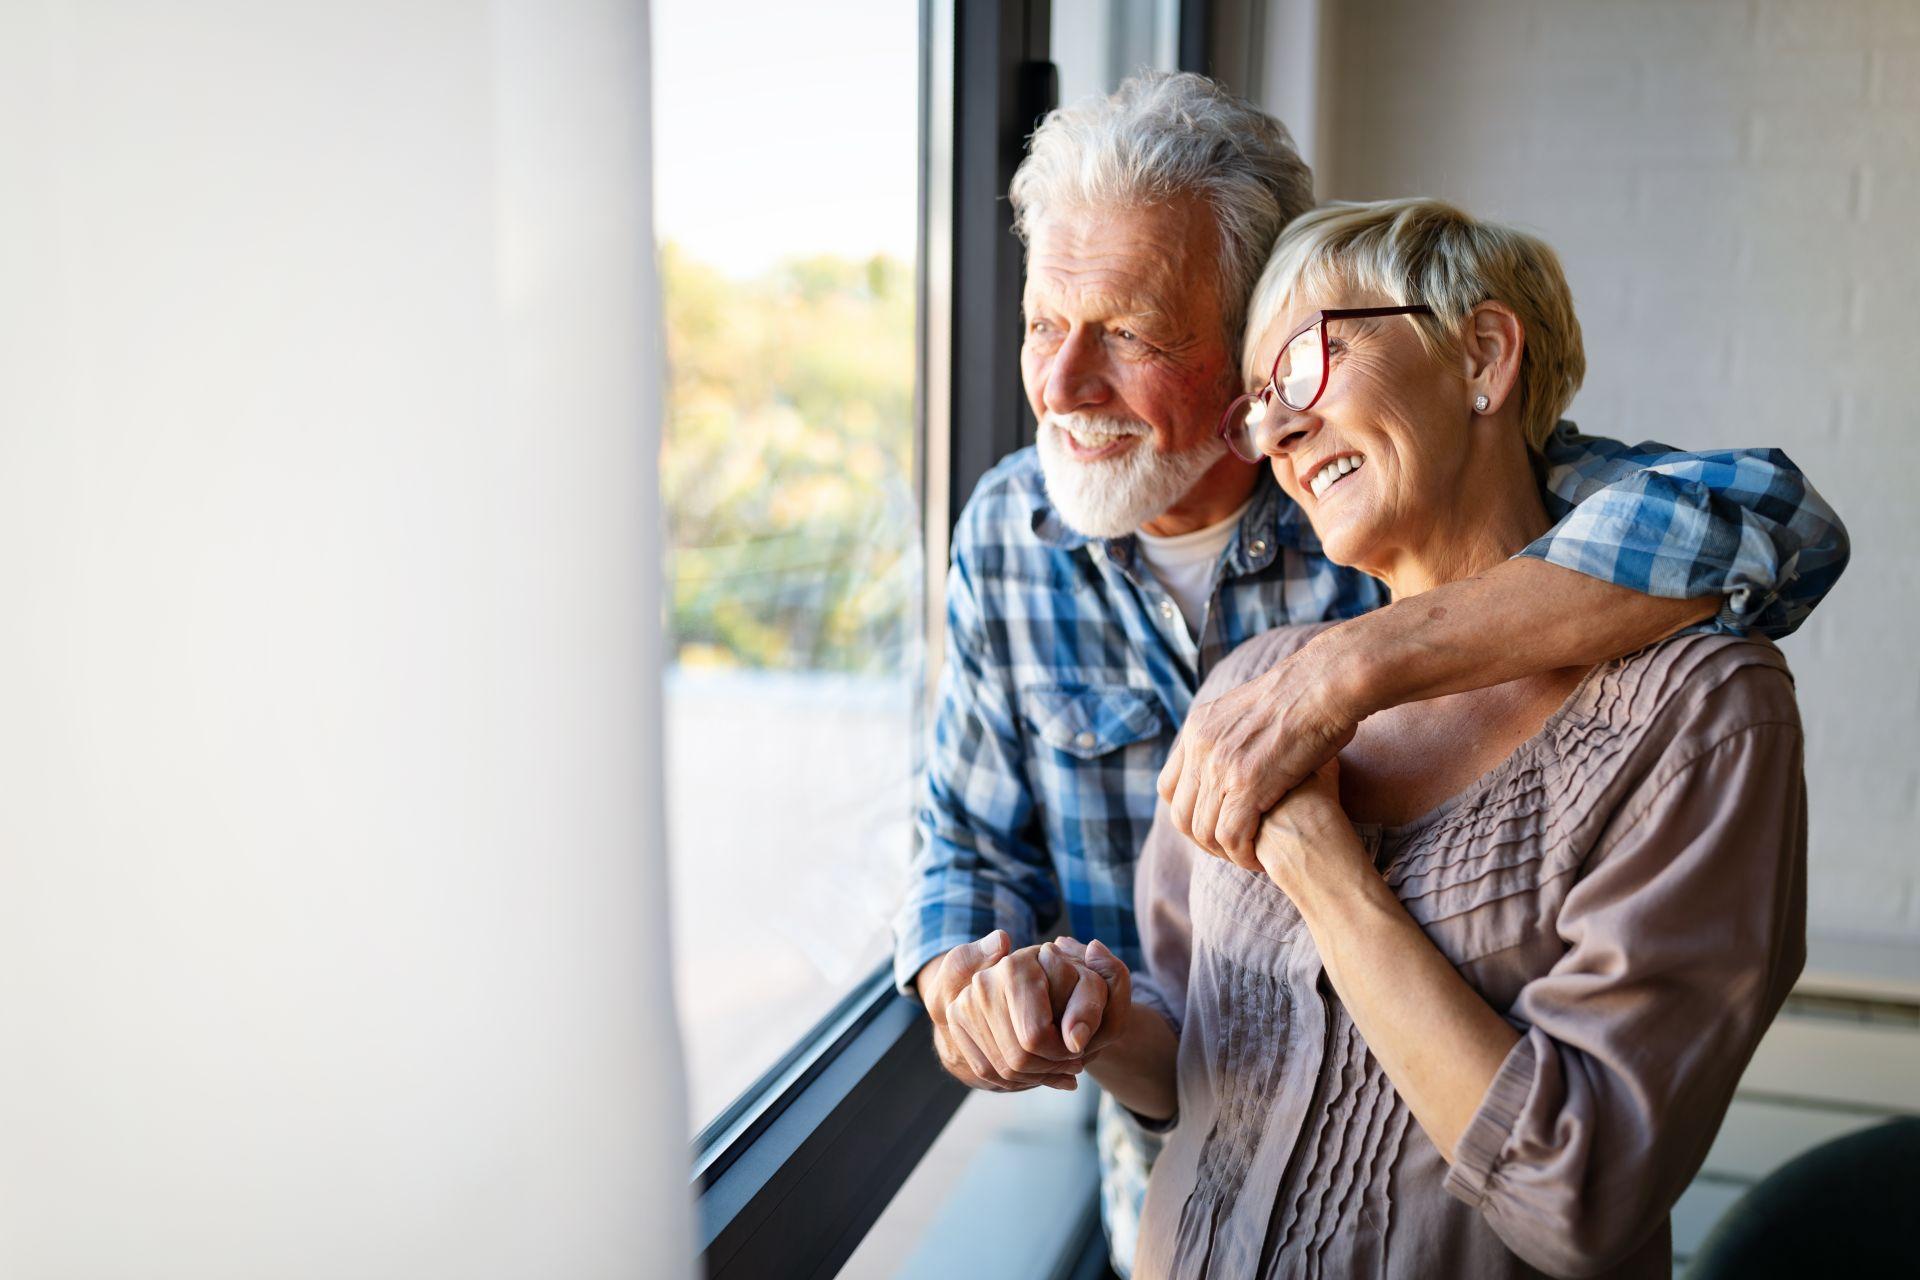 happy-smiling-senior-couple-embracing-together by window